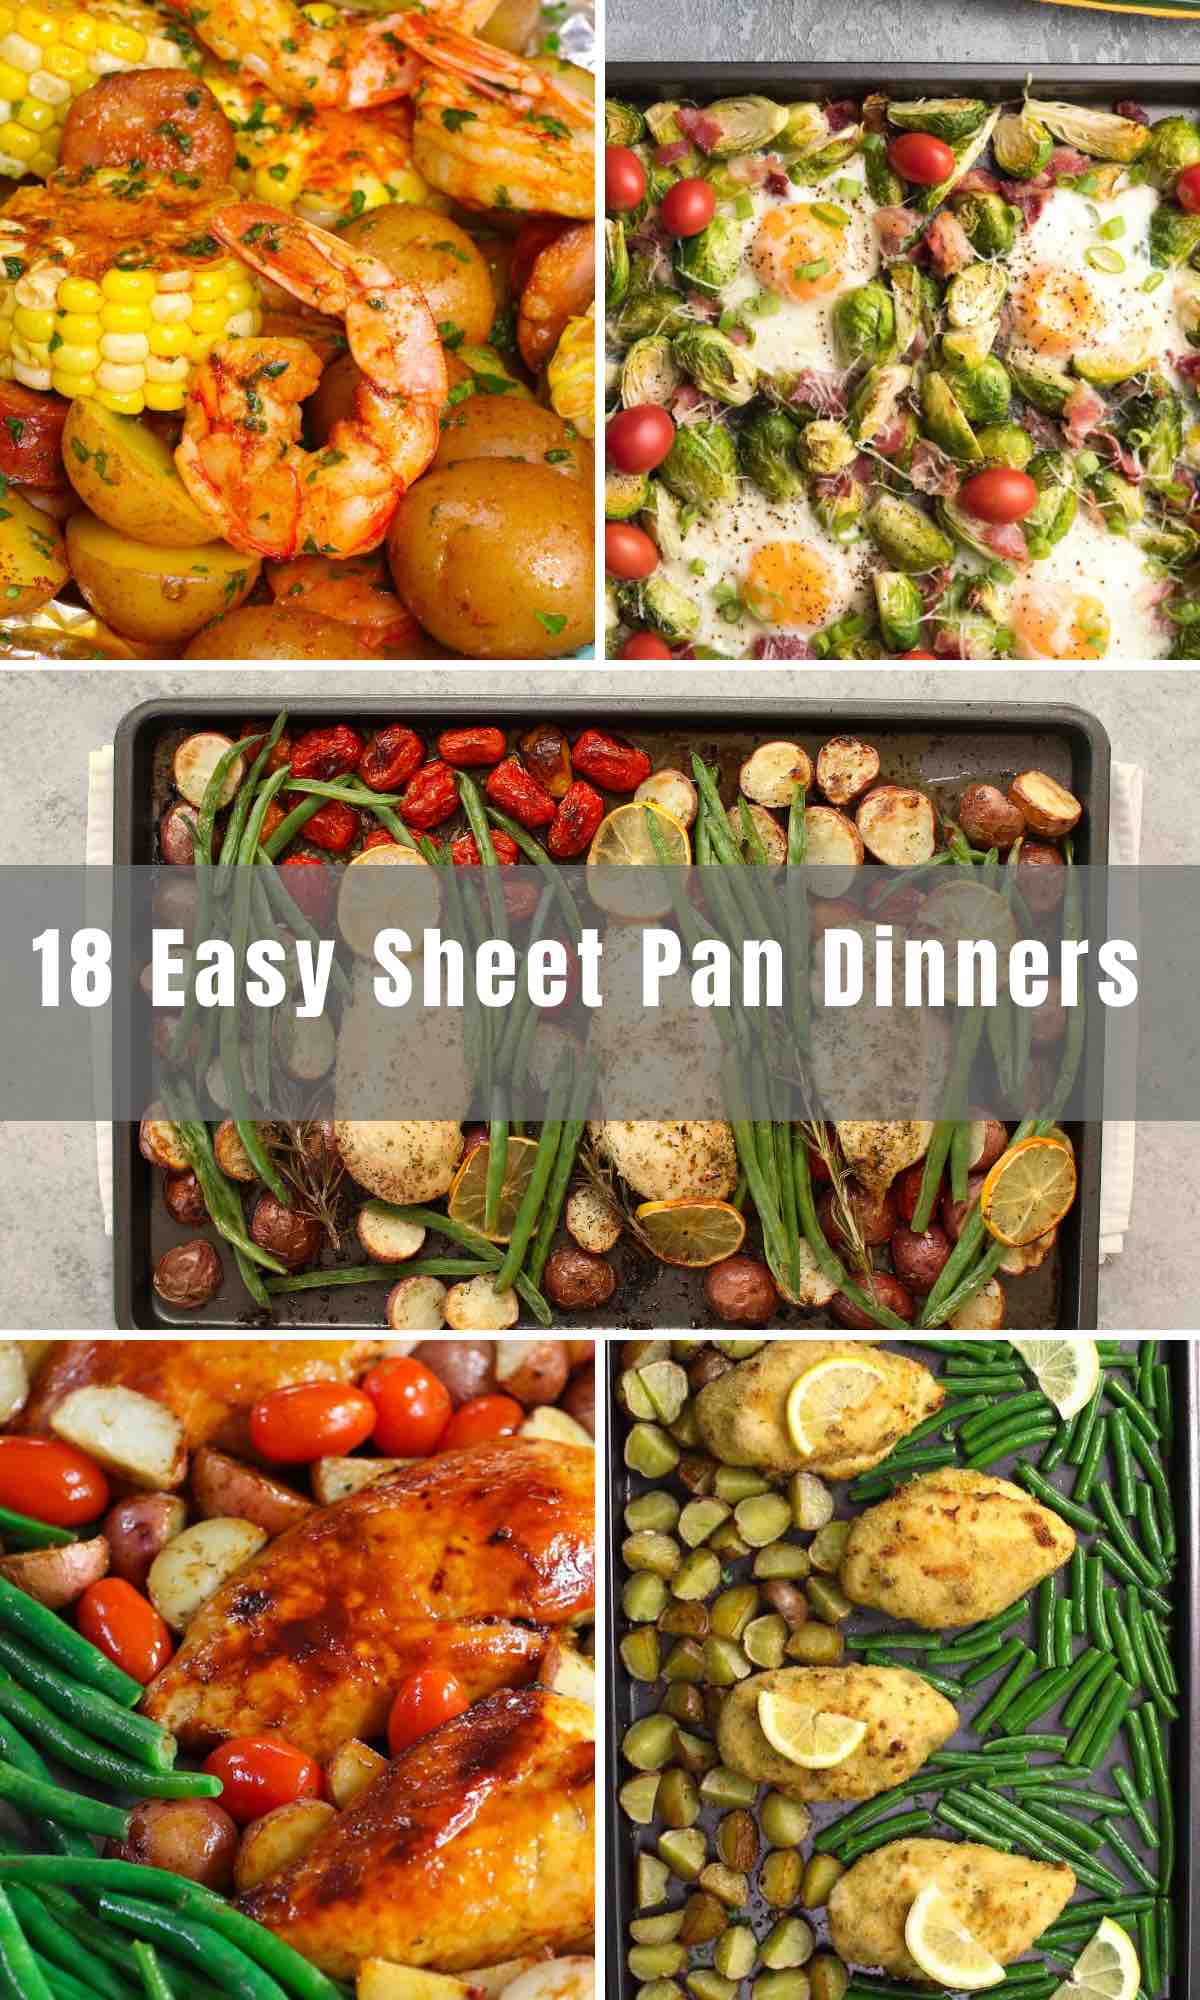 When it comes to convenience and easy cleanup, the sheet pan is king! Sheet Pan Recipes make it quick to prepare satisfying and wholesome dinners using a single pan. Just place the sheet pan with the ingredients in the oven and dinner will be on the table before you know it. You can even prepare both your side dish and entree on one pan, making it a godsend on stressful weeknights